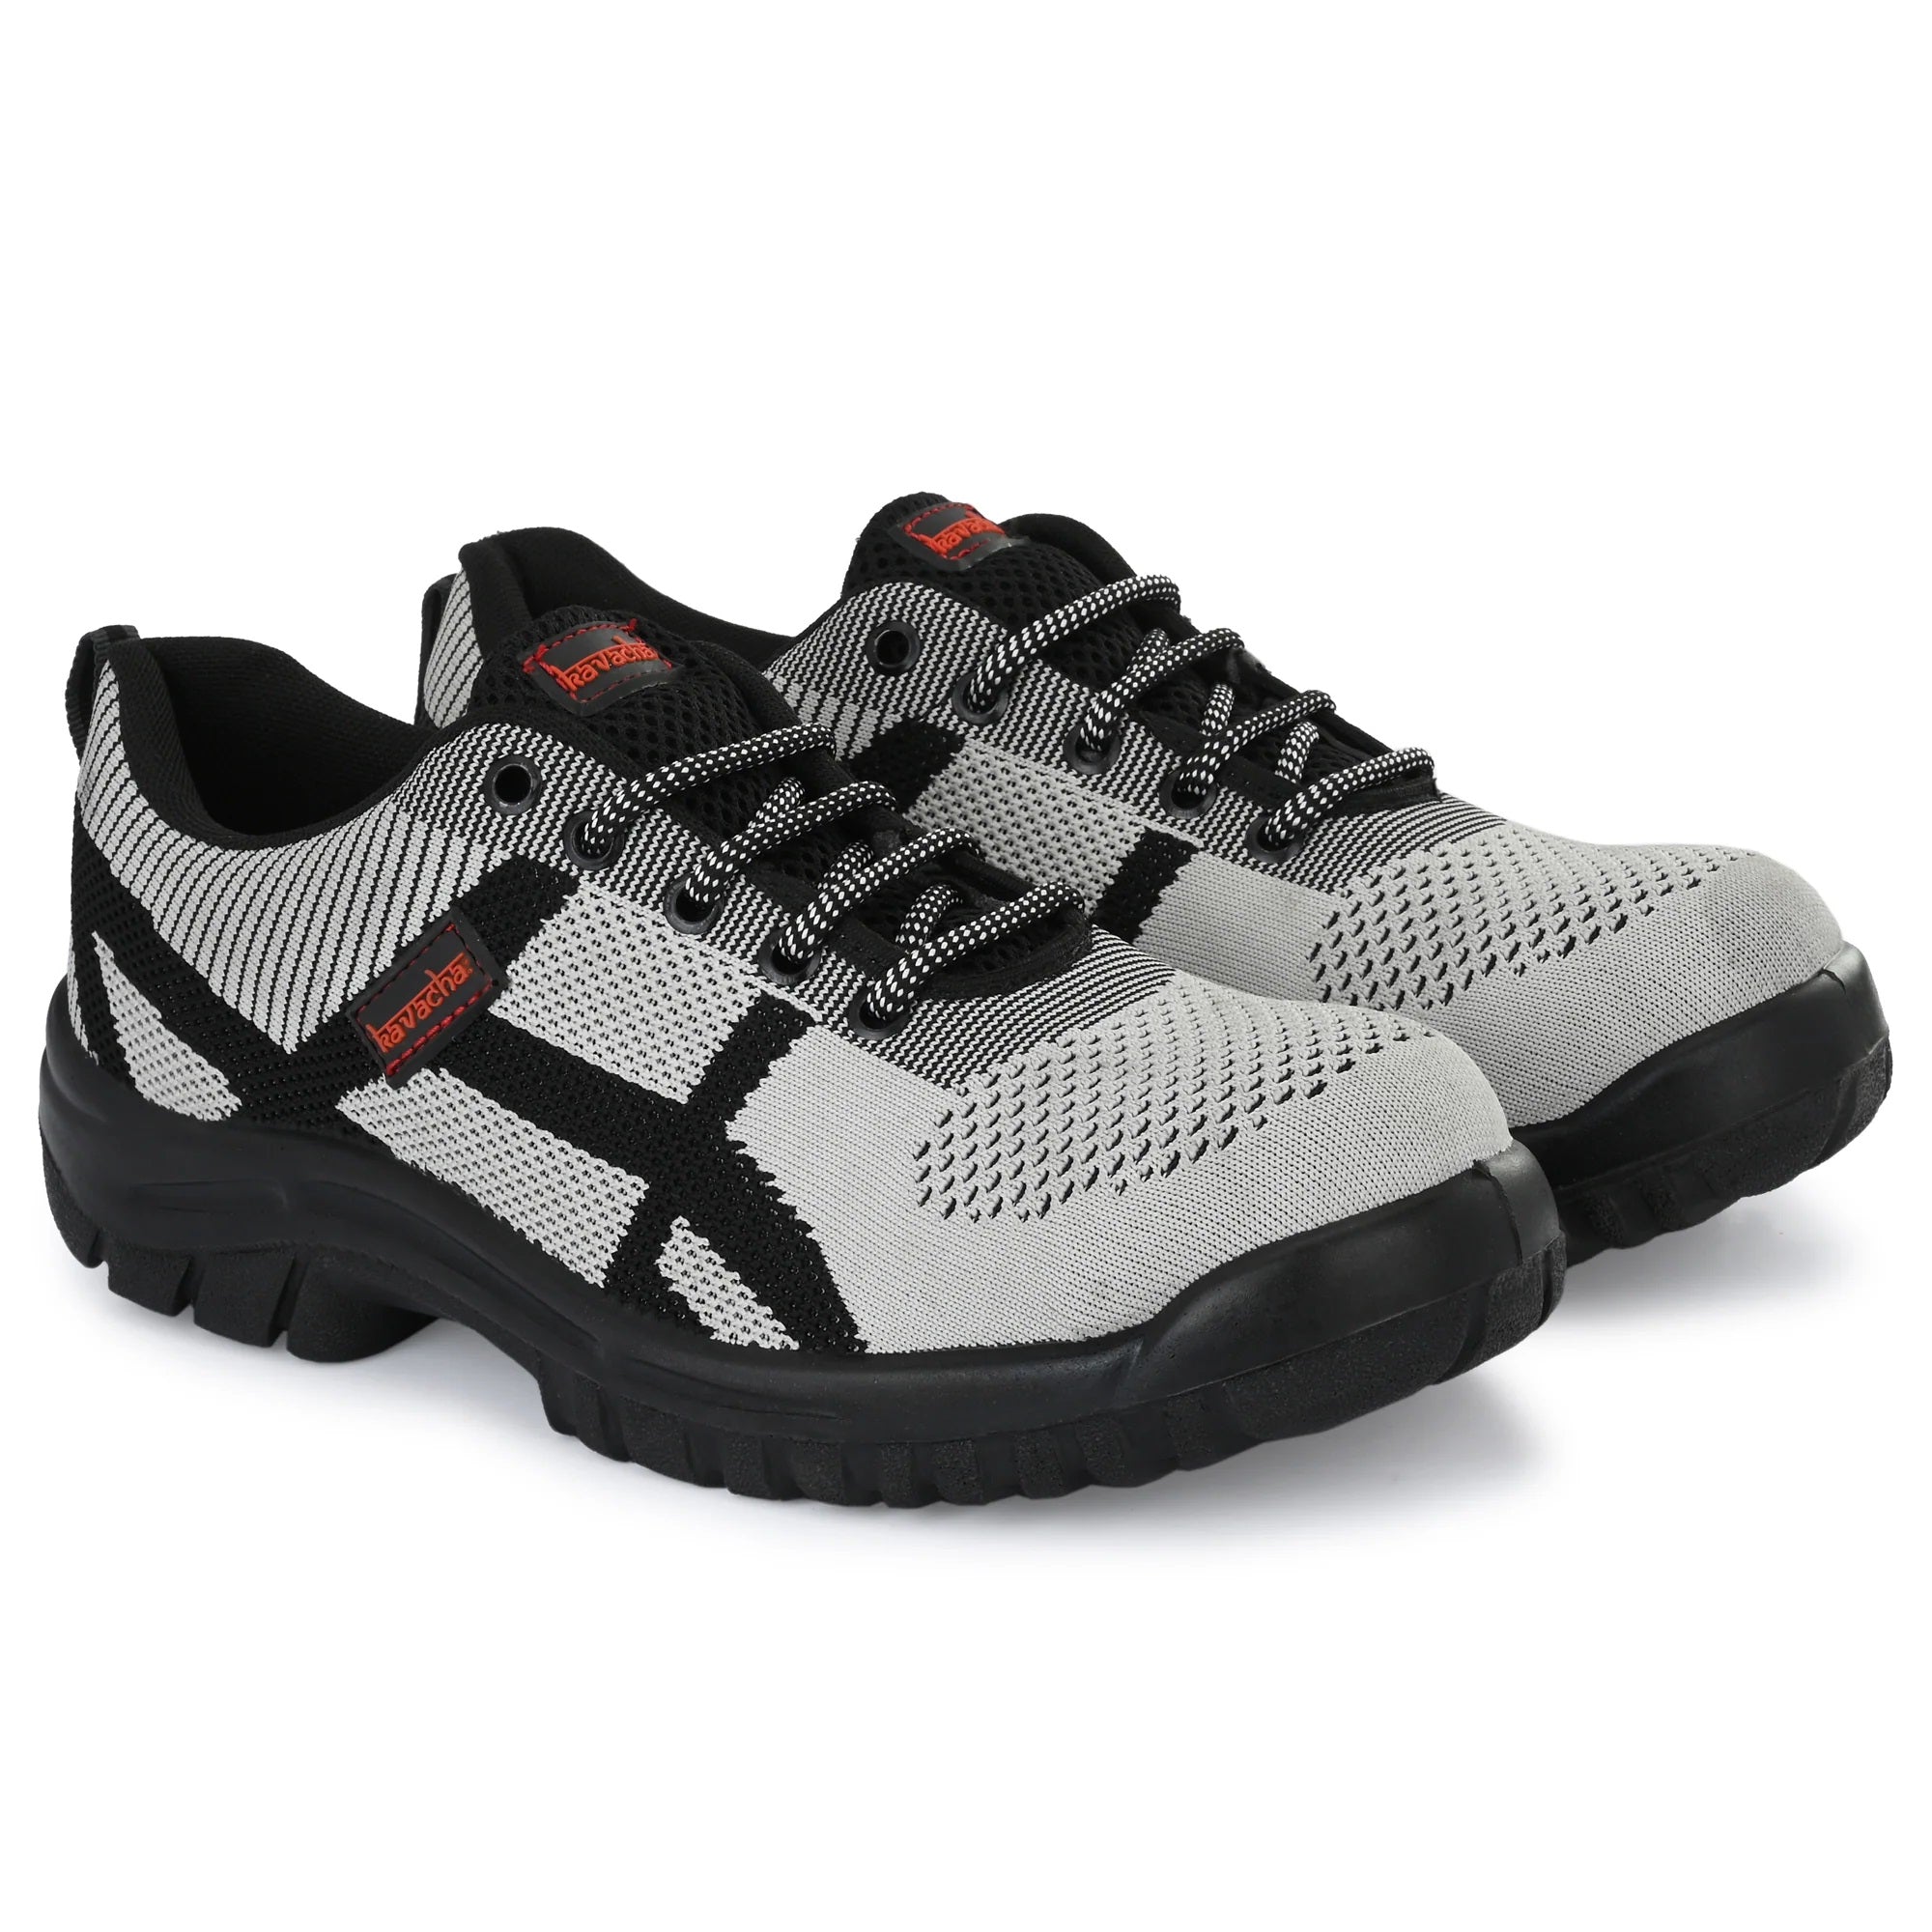 Kavacha Steel Toe Safety with Knitted Upper and PU Sole S212